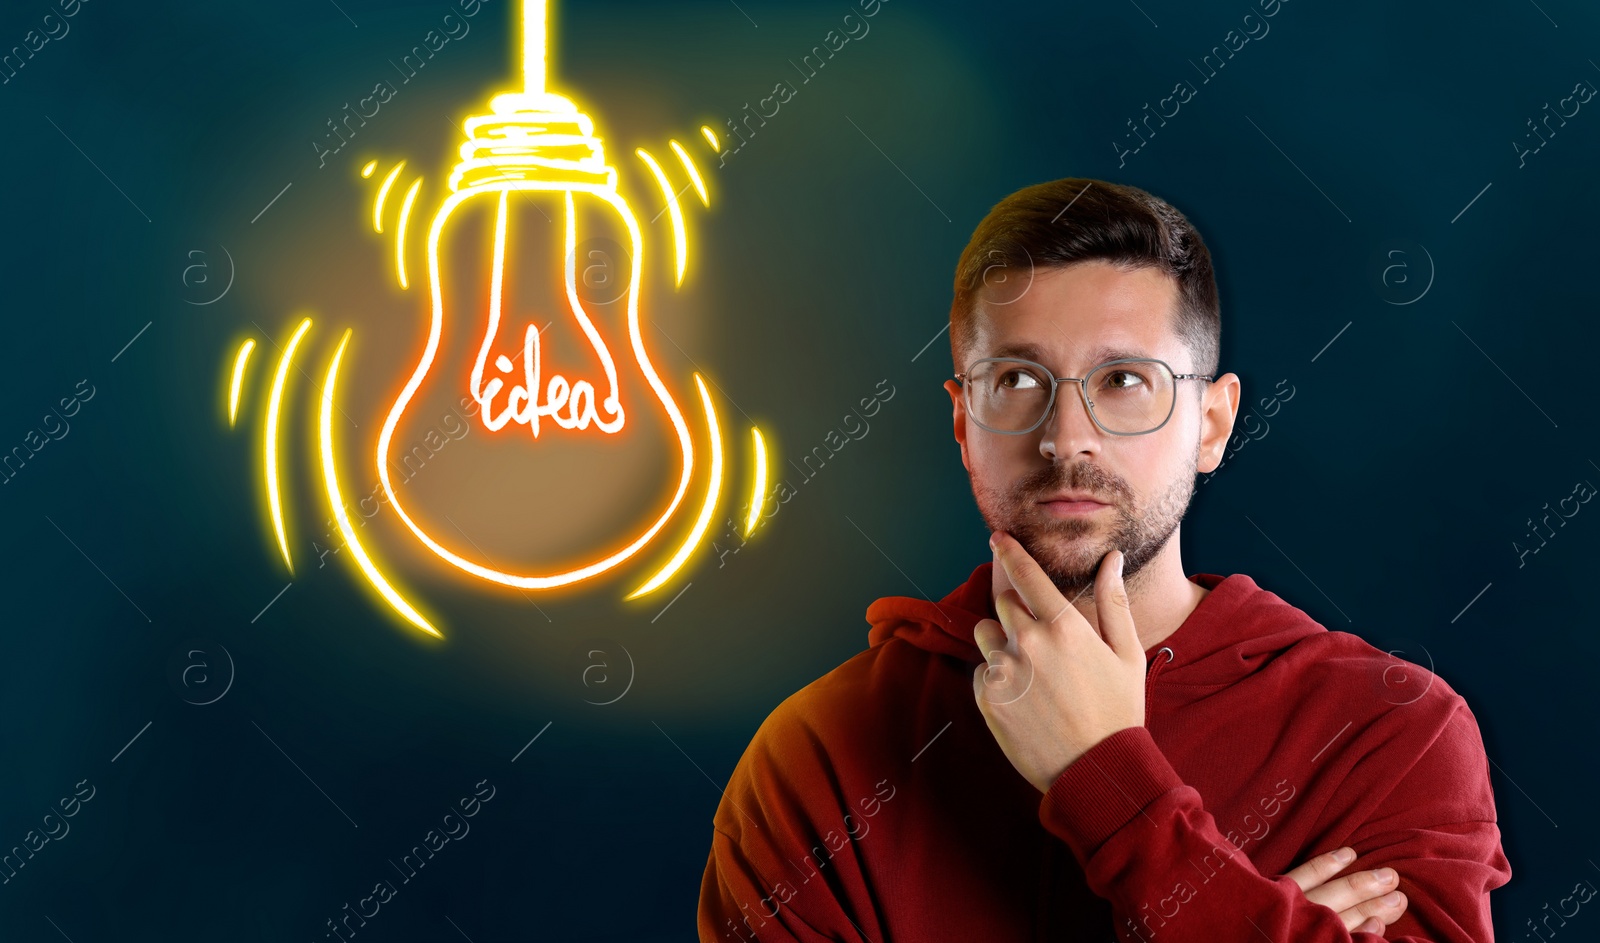 Image of Idea generation. Thoughtful man and illustration of glowing light bulb on dark background